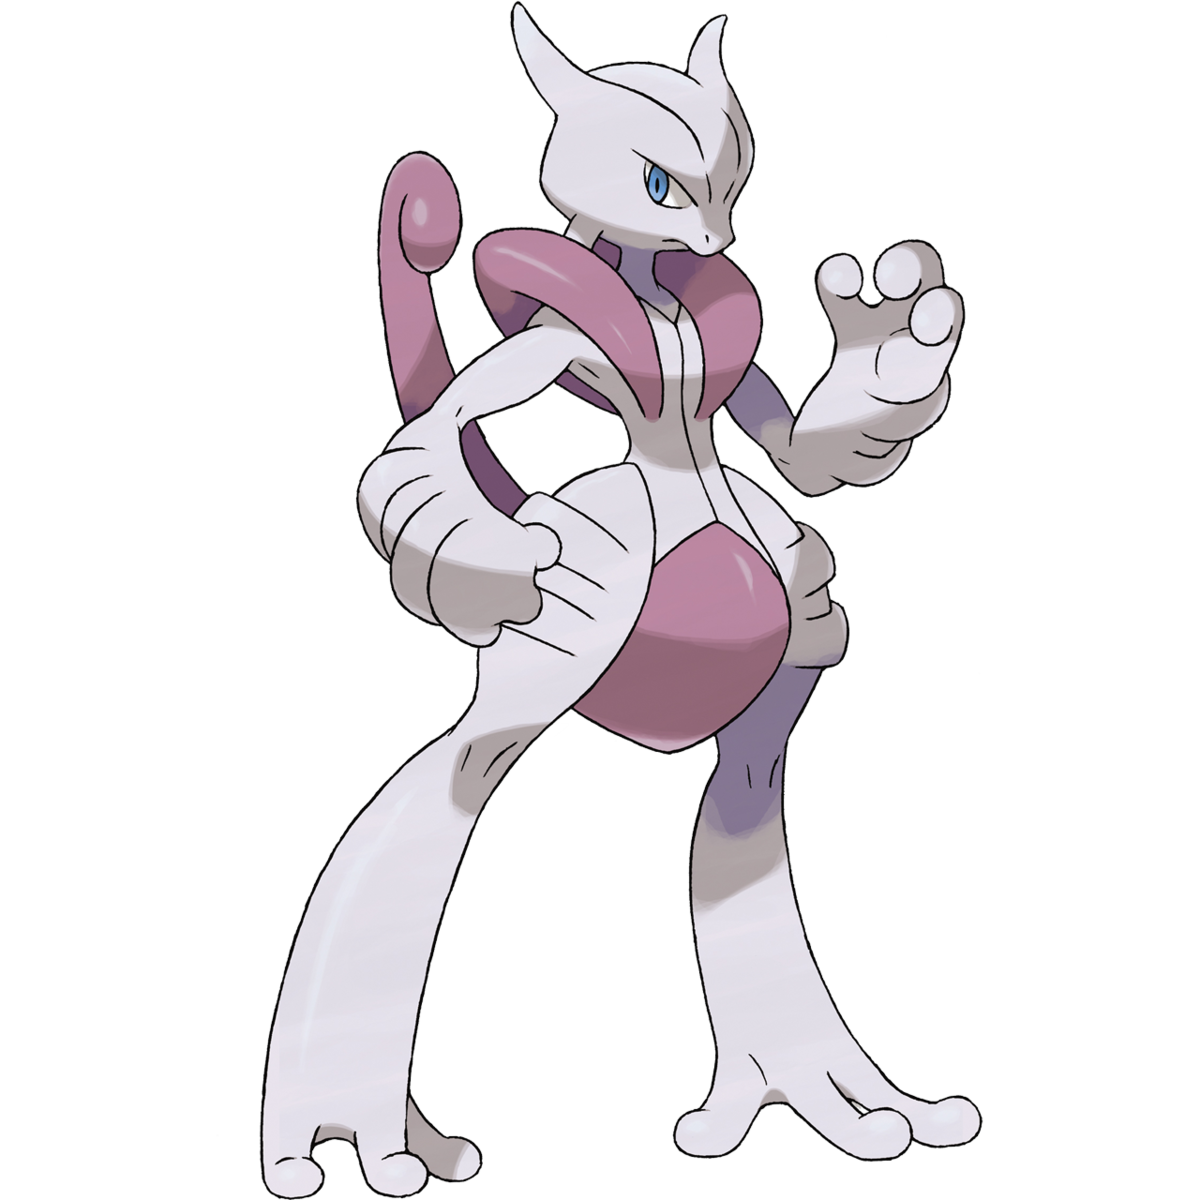 Had a go at drawing Armored Mewtwo  Mew and mewtwo, Pokemon mewtwo, Mewtwo